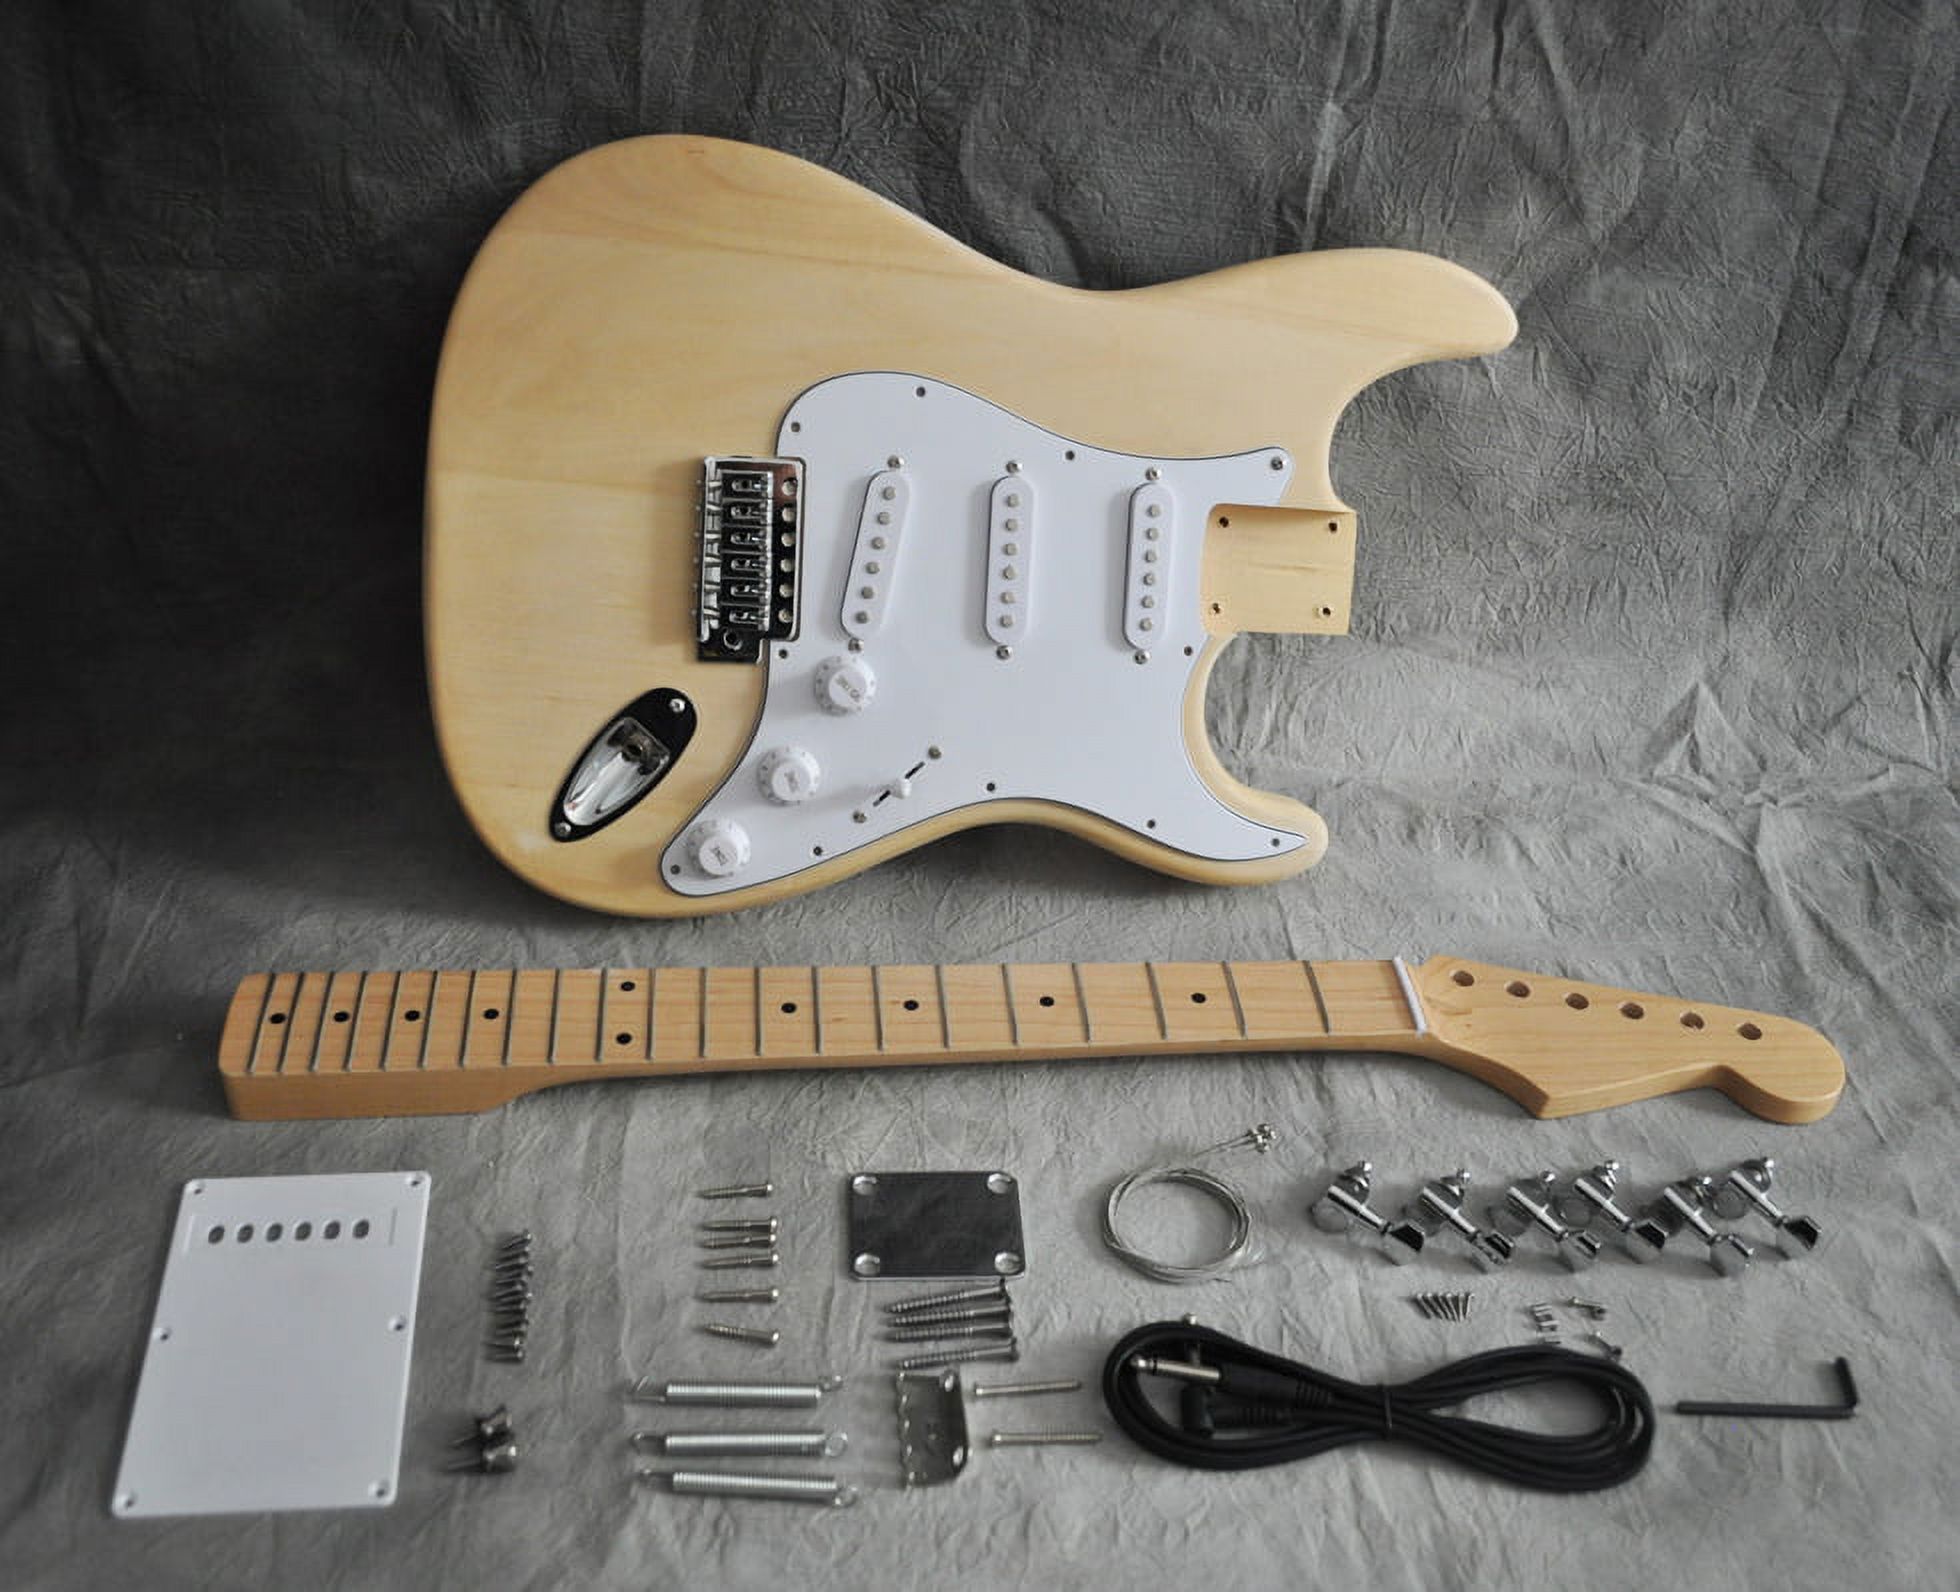 RSW DIY Electric Guitar kit with Basswood Body Maple Neck and Fingerboard 21 Frets S-S-S Pickups Bolt On - image 5 of 6